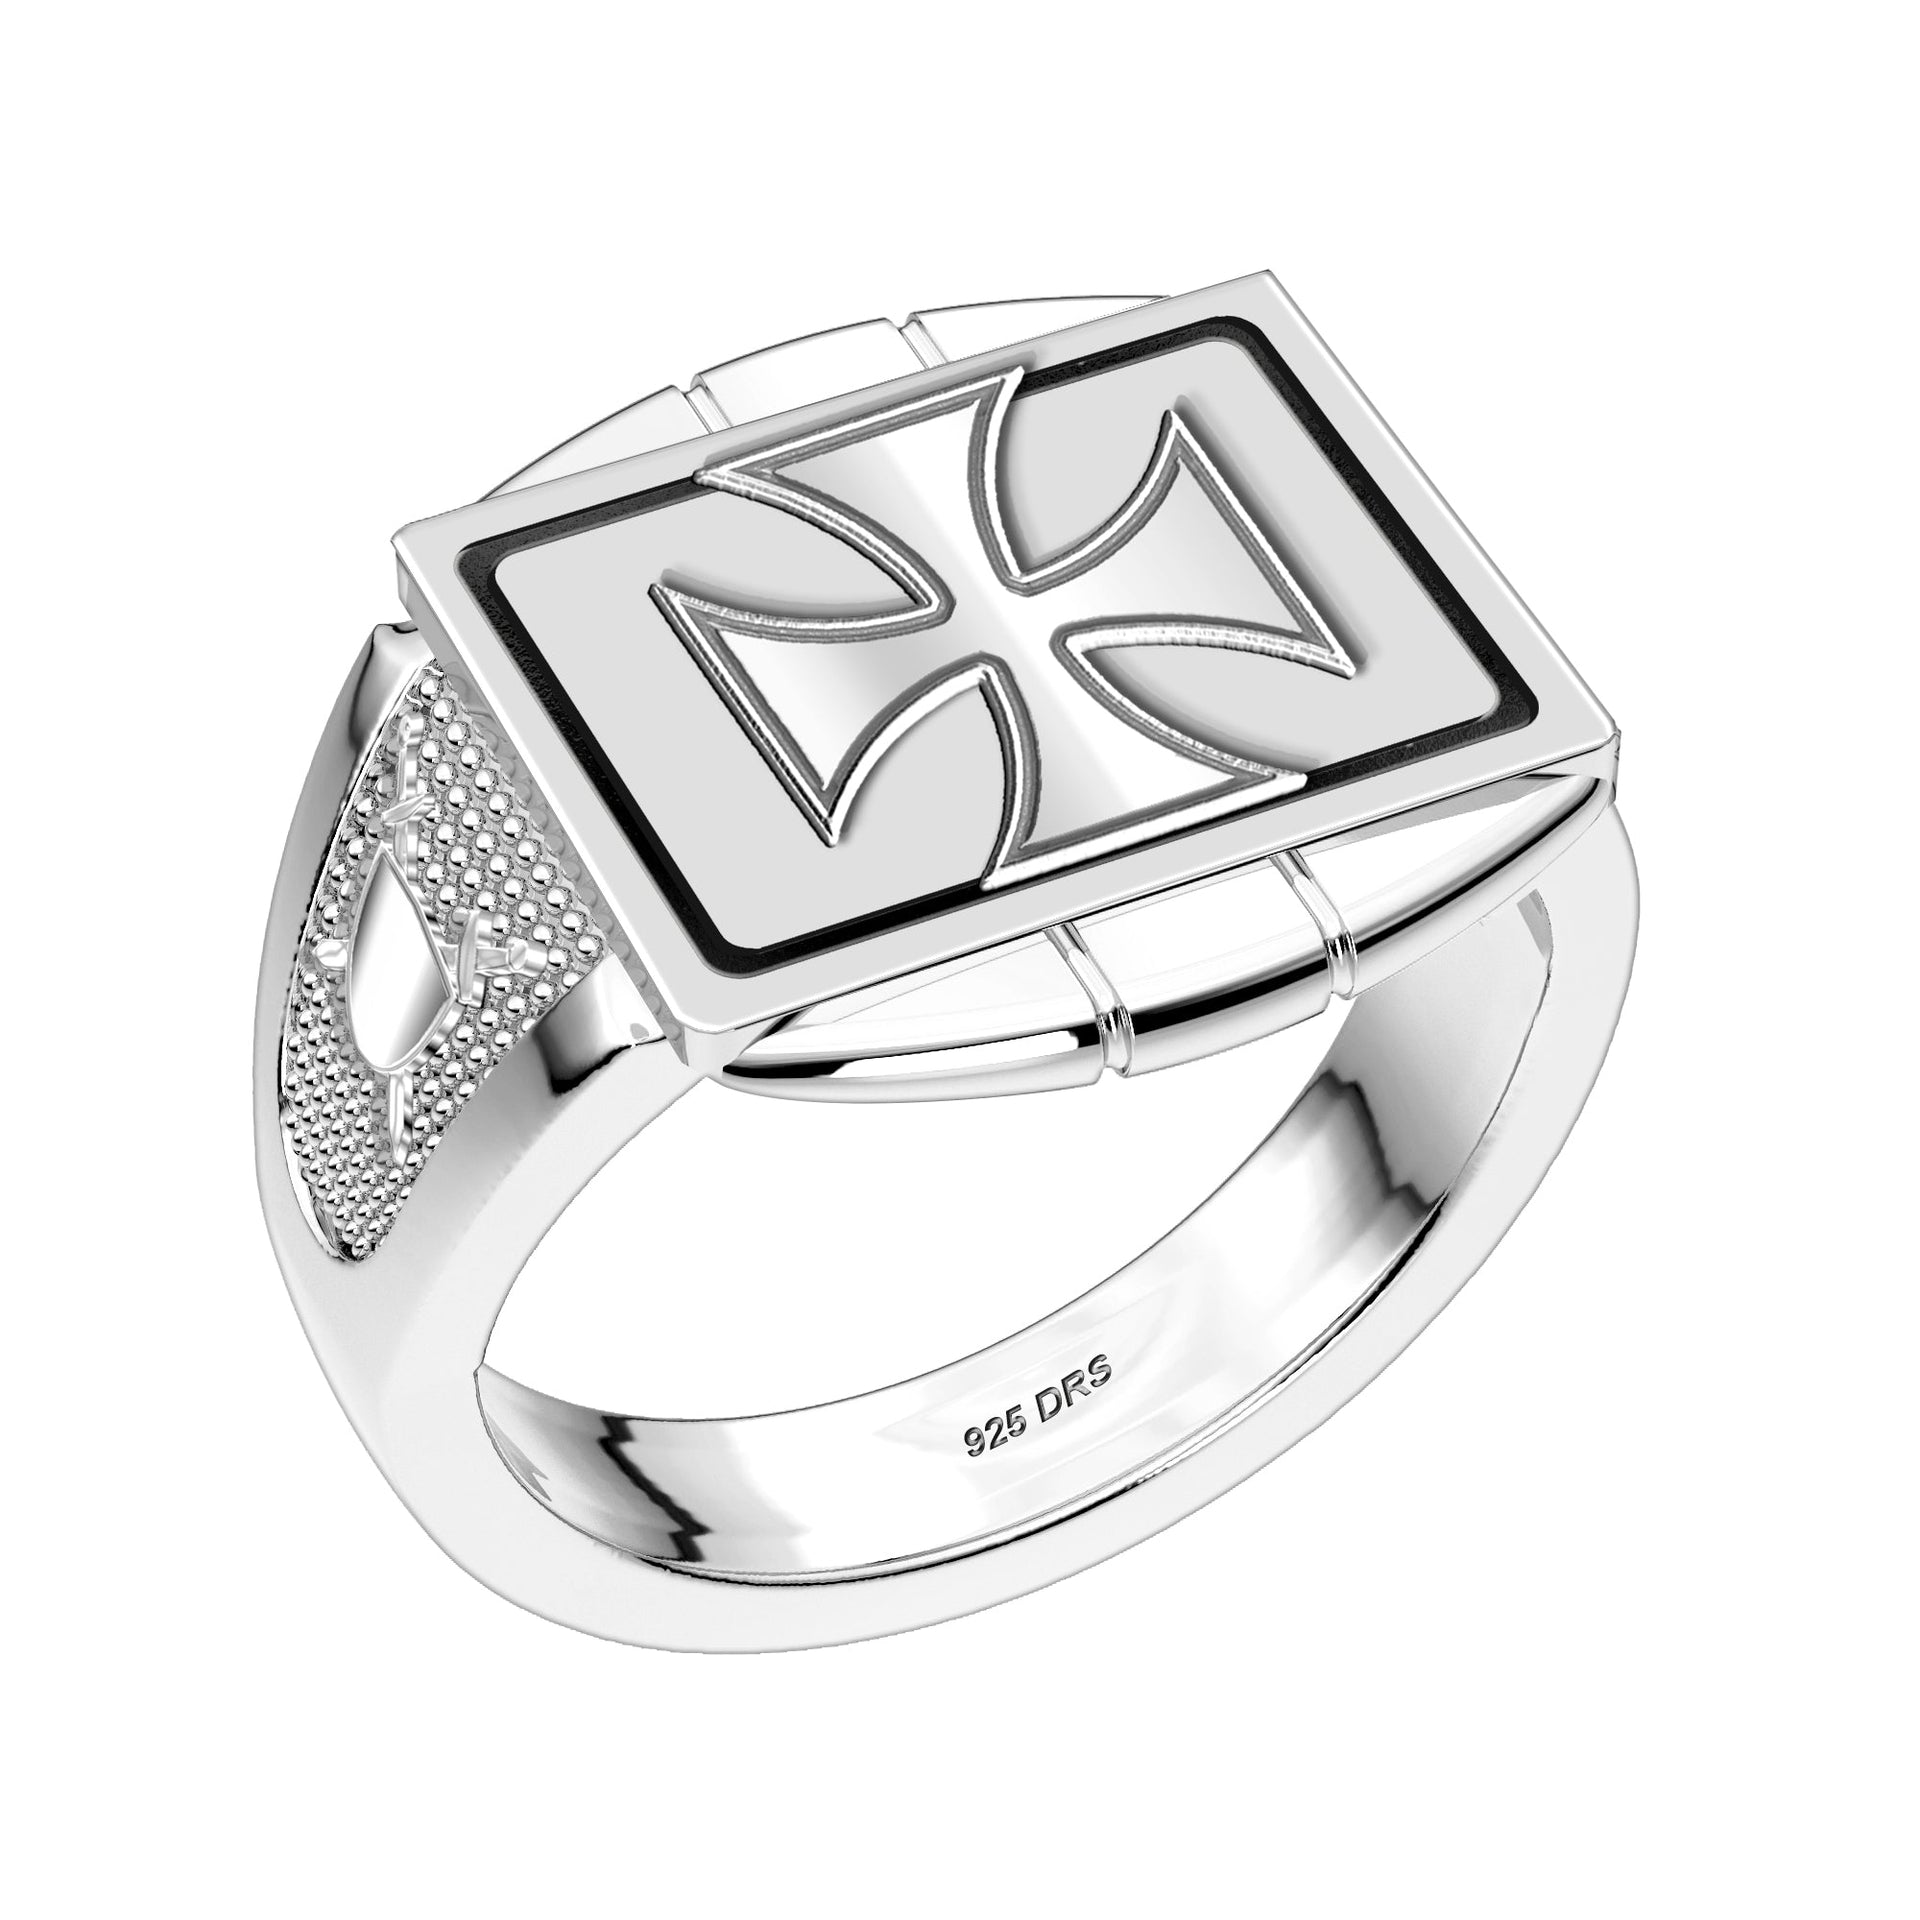 US Jewels Masonic Customizable Men's 925 Sterling Silver with Optional 10k or 14k Gold Masonic Rings - US Jewels